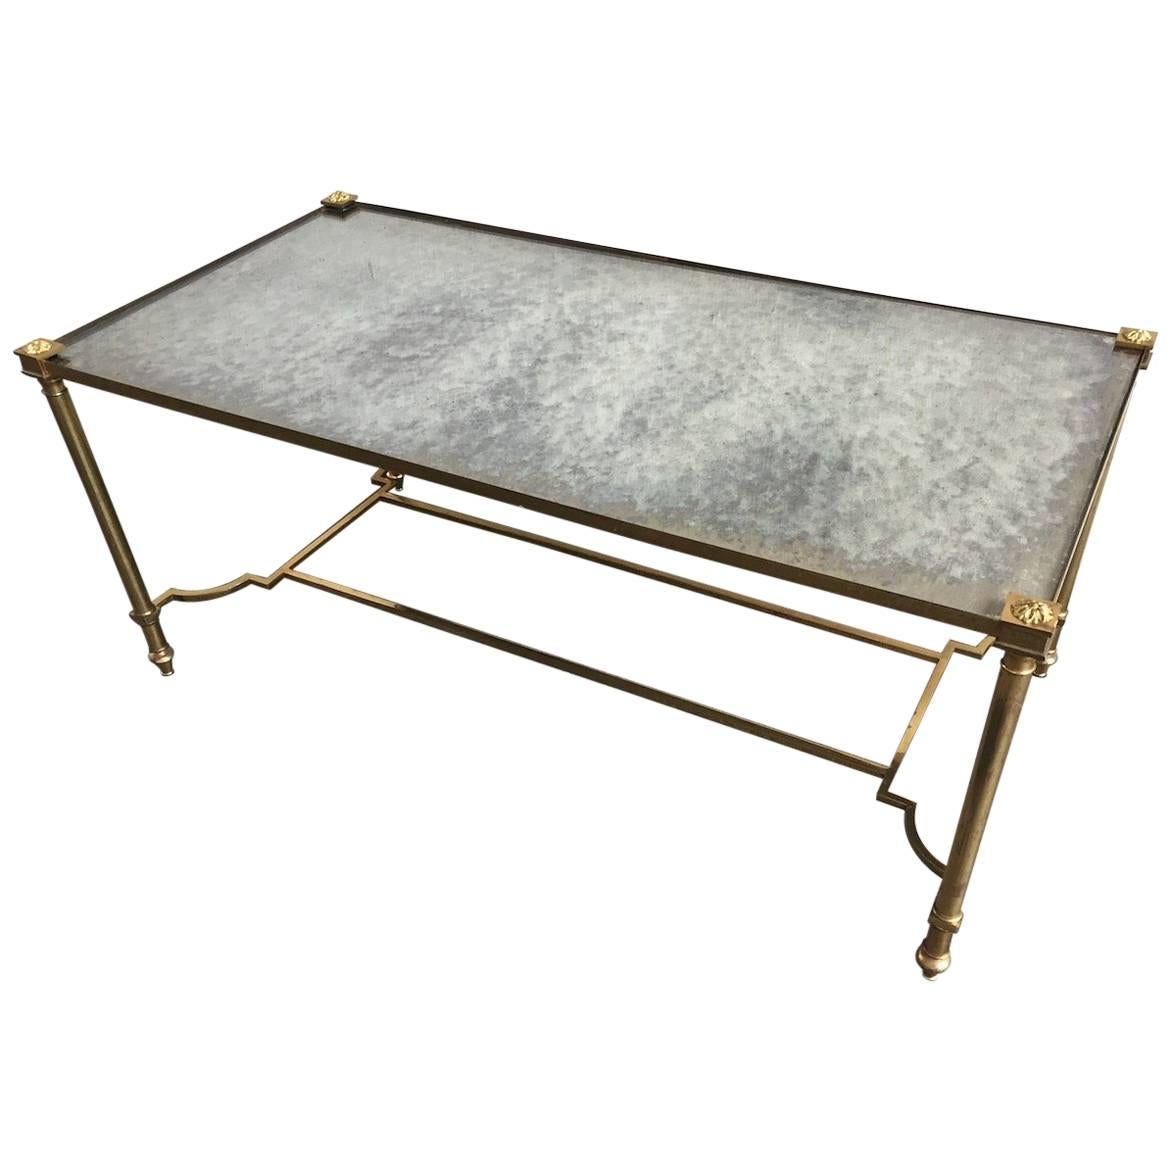 Nice Coffee or Side Table with Cloudy Mirrored Glass Top and Gilded Metal Base